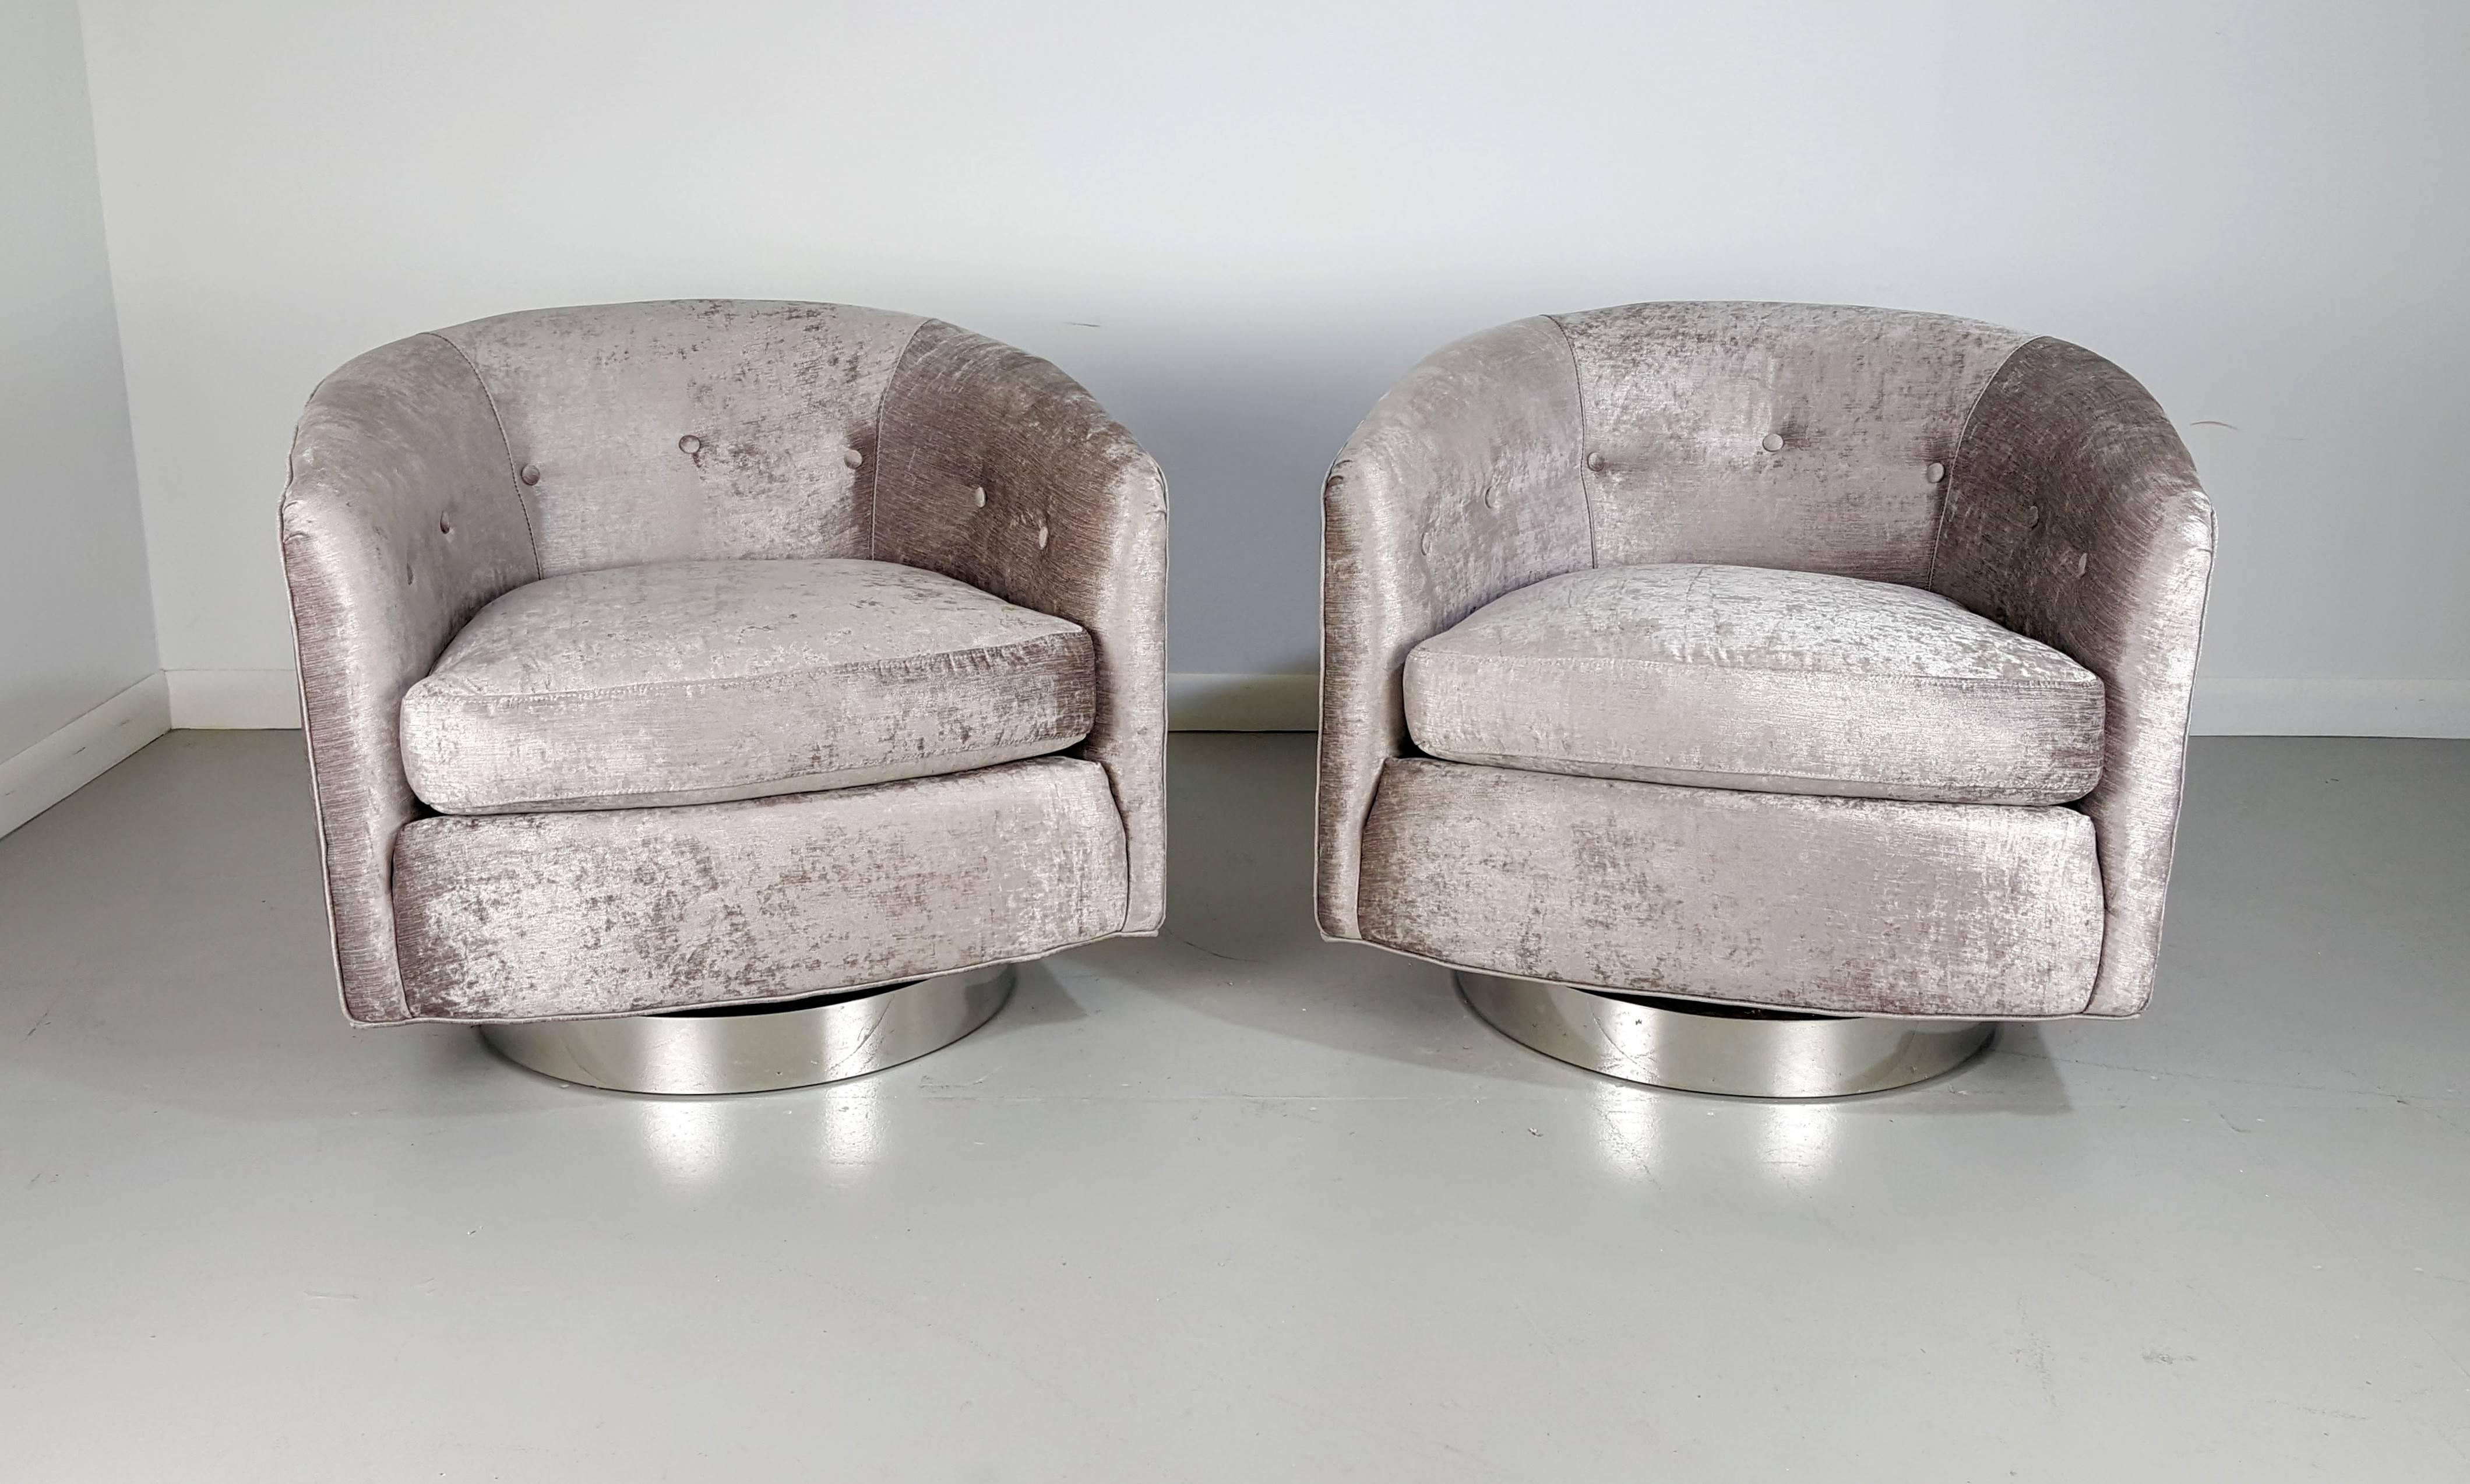 Incredible swivel lounge chairs in silver velvet on chrome bases, 1970s. Fully restored. Very comfortable. Heavy and well-made.

We offer free regular deliveries to NYC and Philadelphia area. Delivery to DC, MD, CT and MA are available if schedule